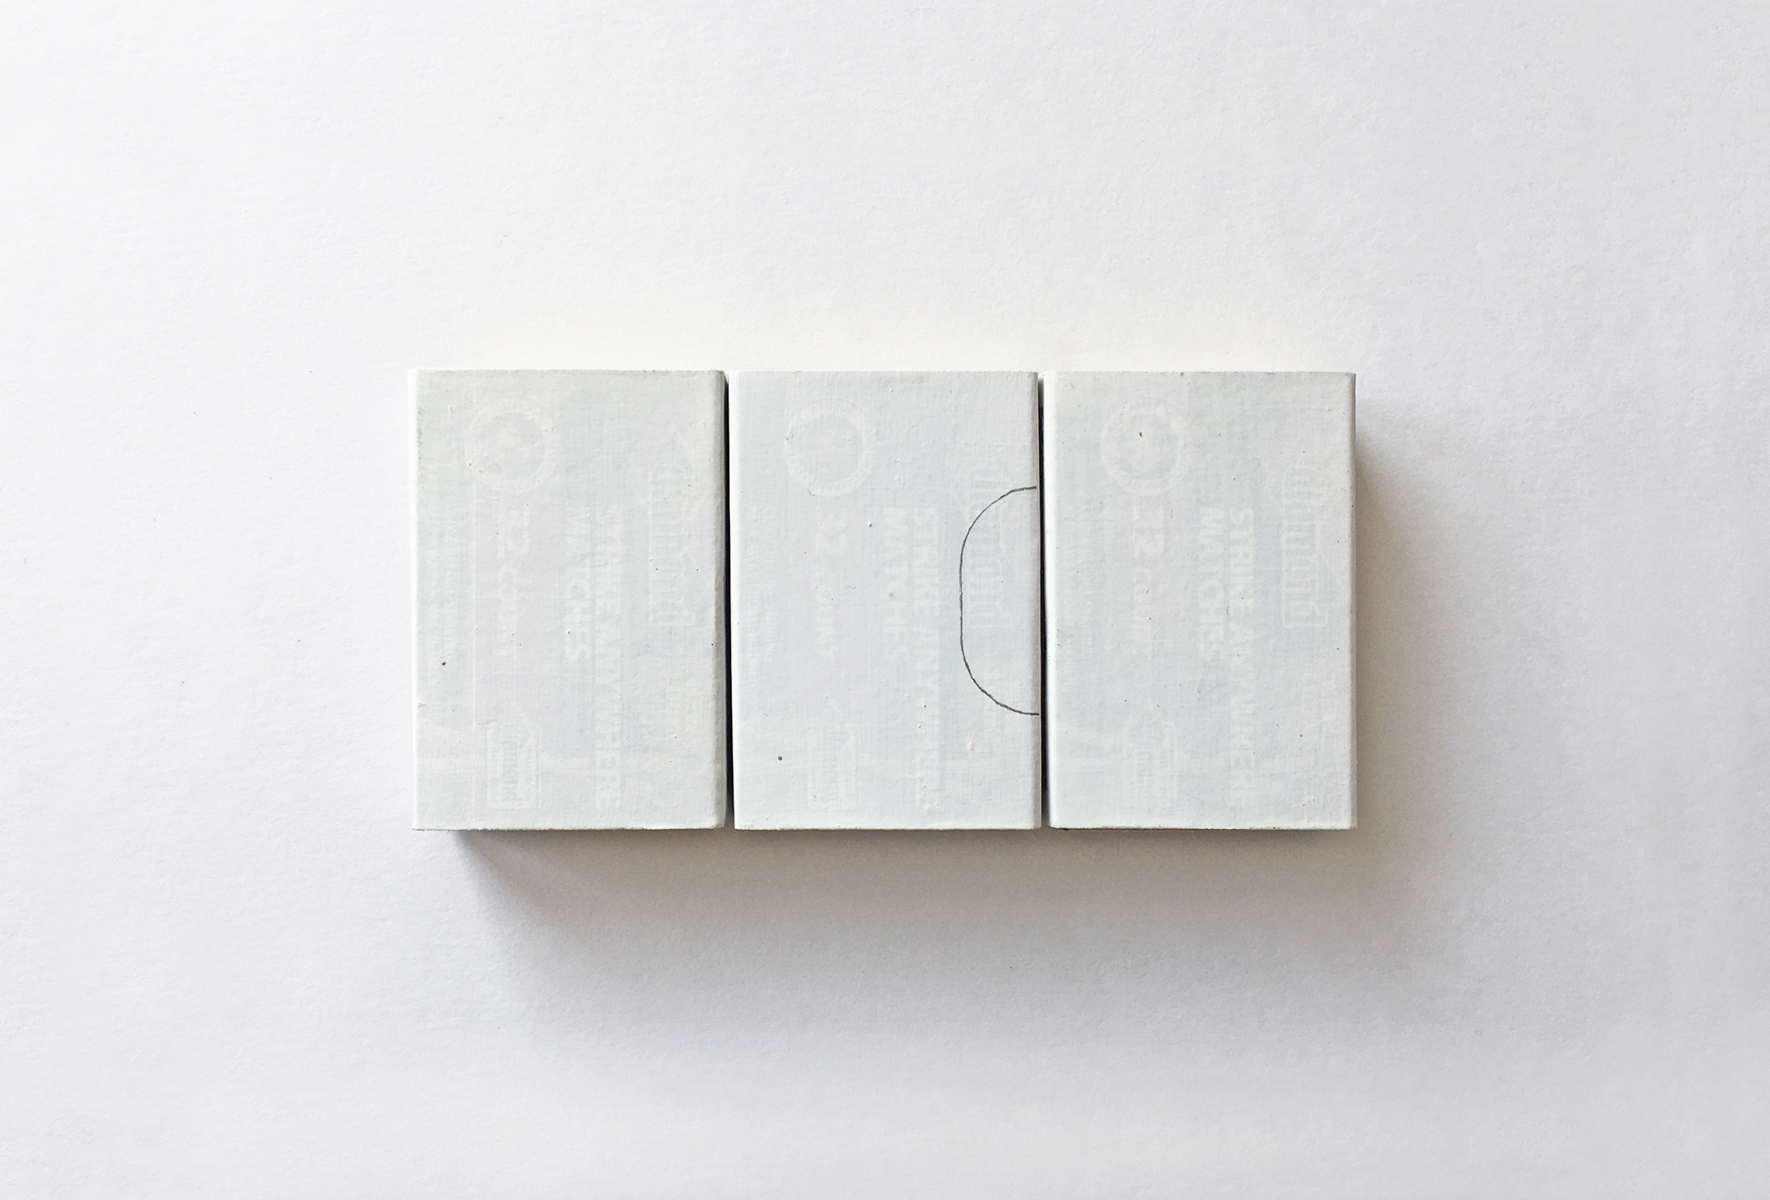 Three matchboxes painted white with a half oval shape pencil outline on one.